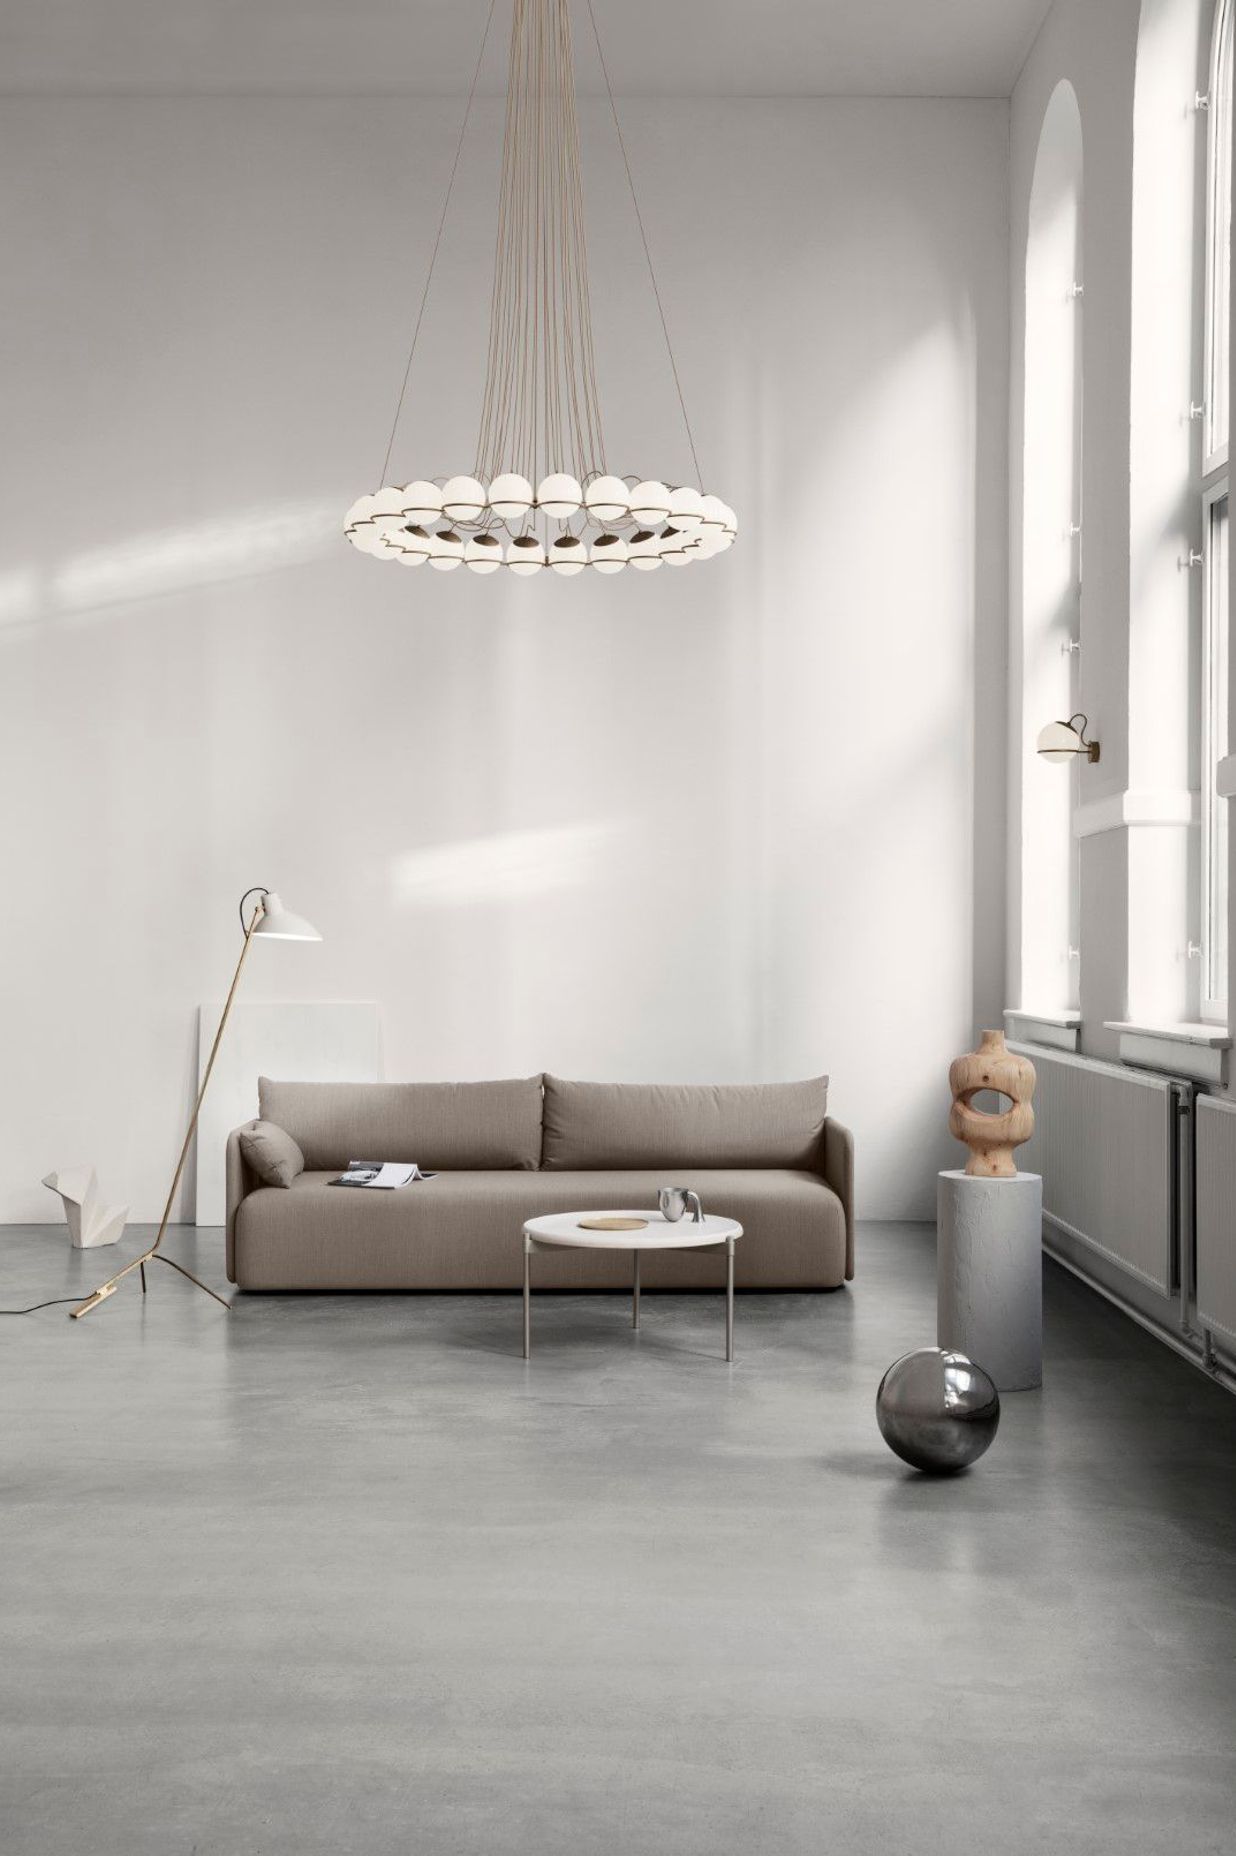 Astep defines the height and details in a room with a family of lighting objects from Gino Sarfatti, the 'Le Sfere' collection.